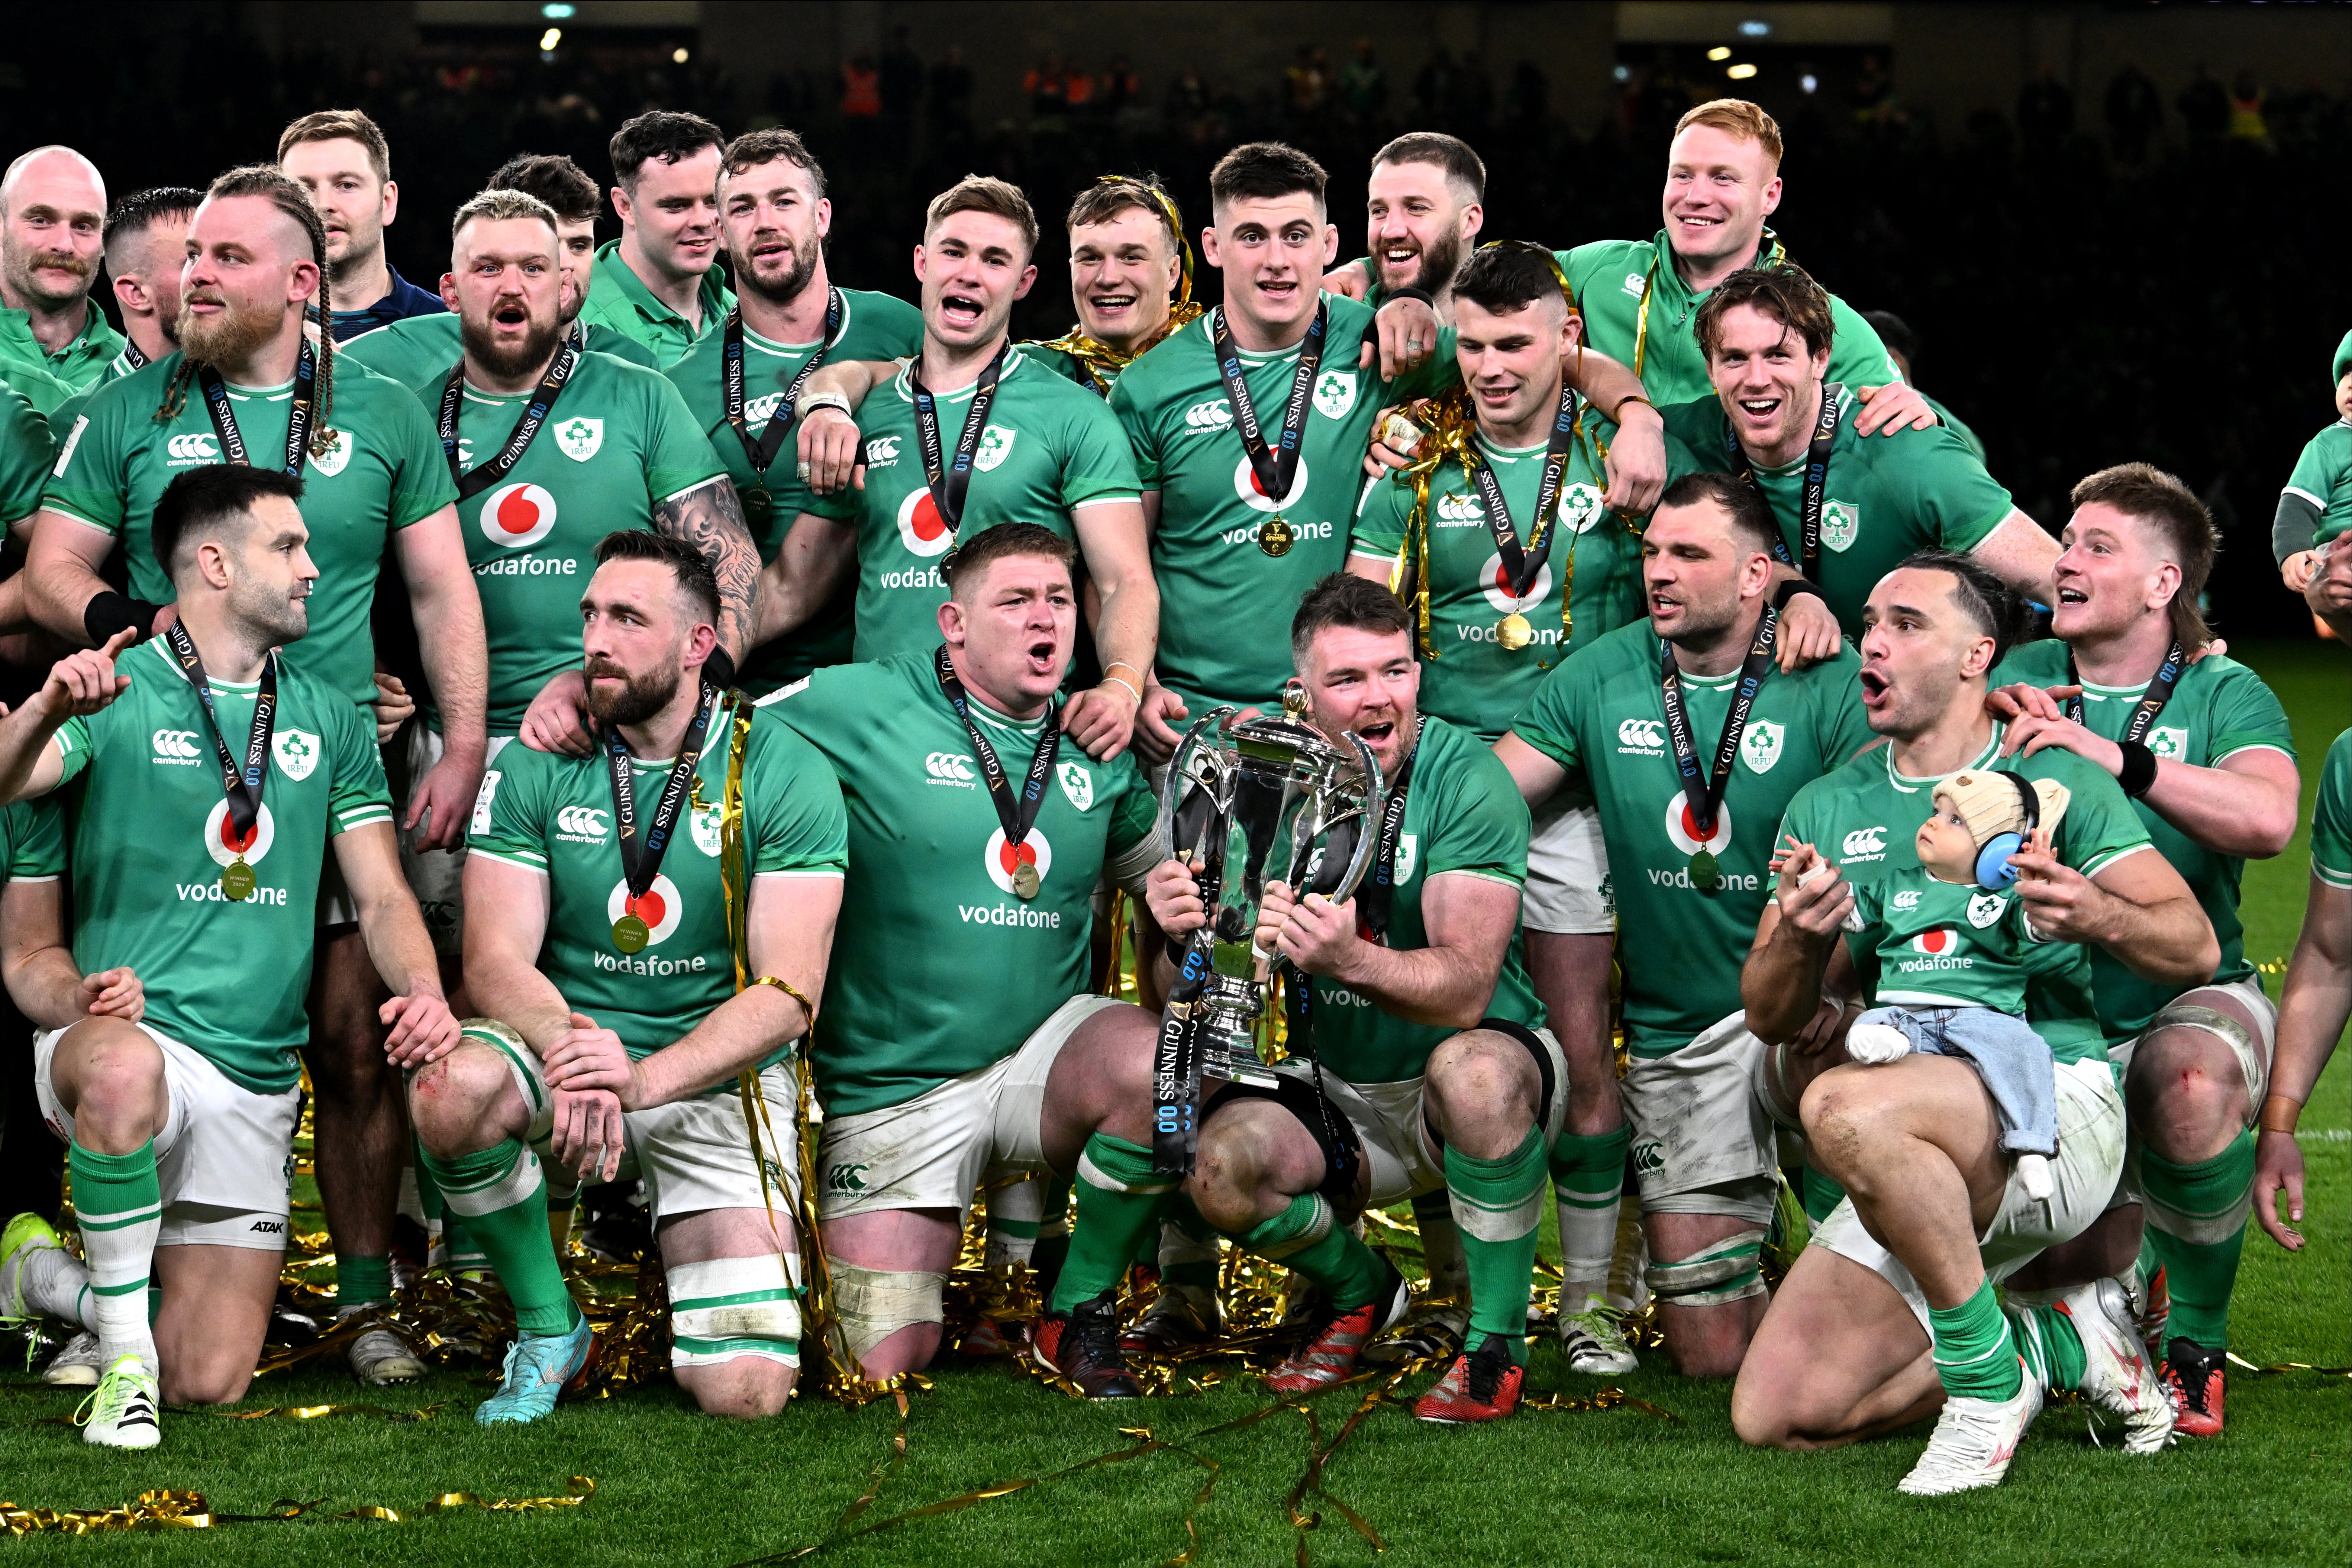 Ireland retained their Six Nations crown with a final weekend victory over Scotland in Dublin